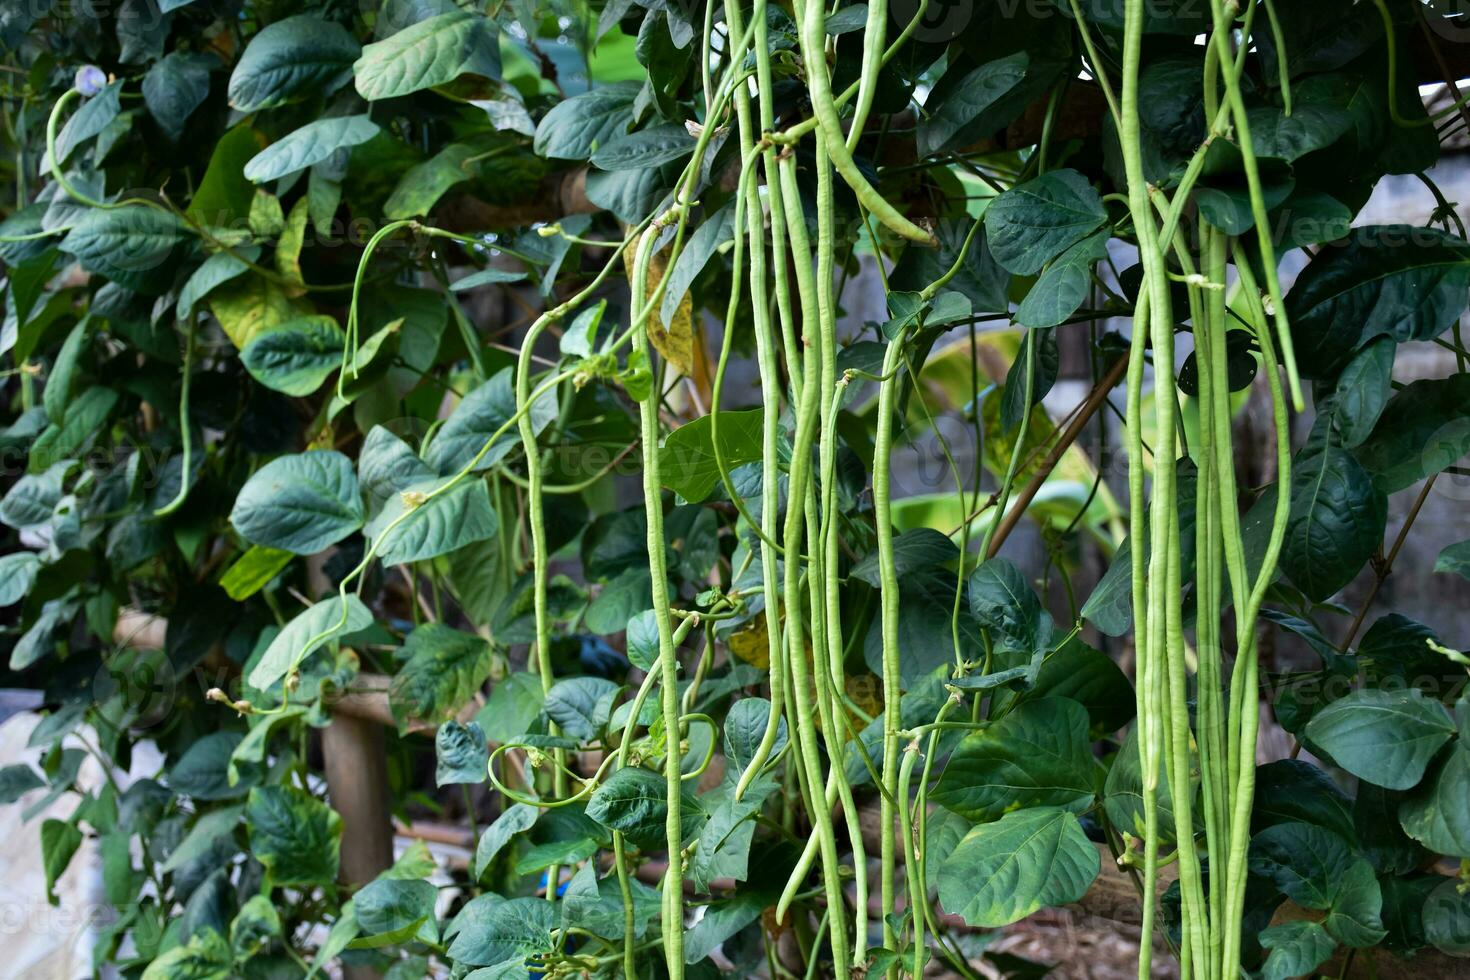 Yard long beans which Thailand local villagers planted near their house to eat at home. photo